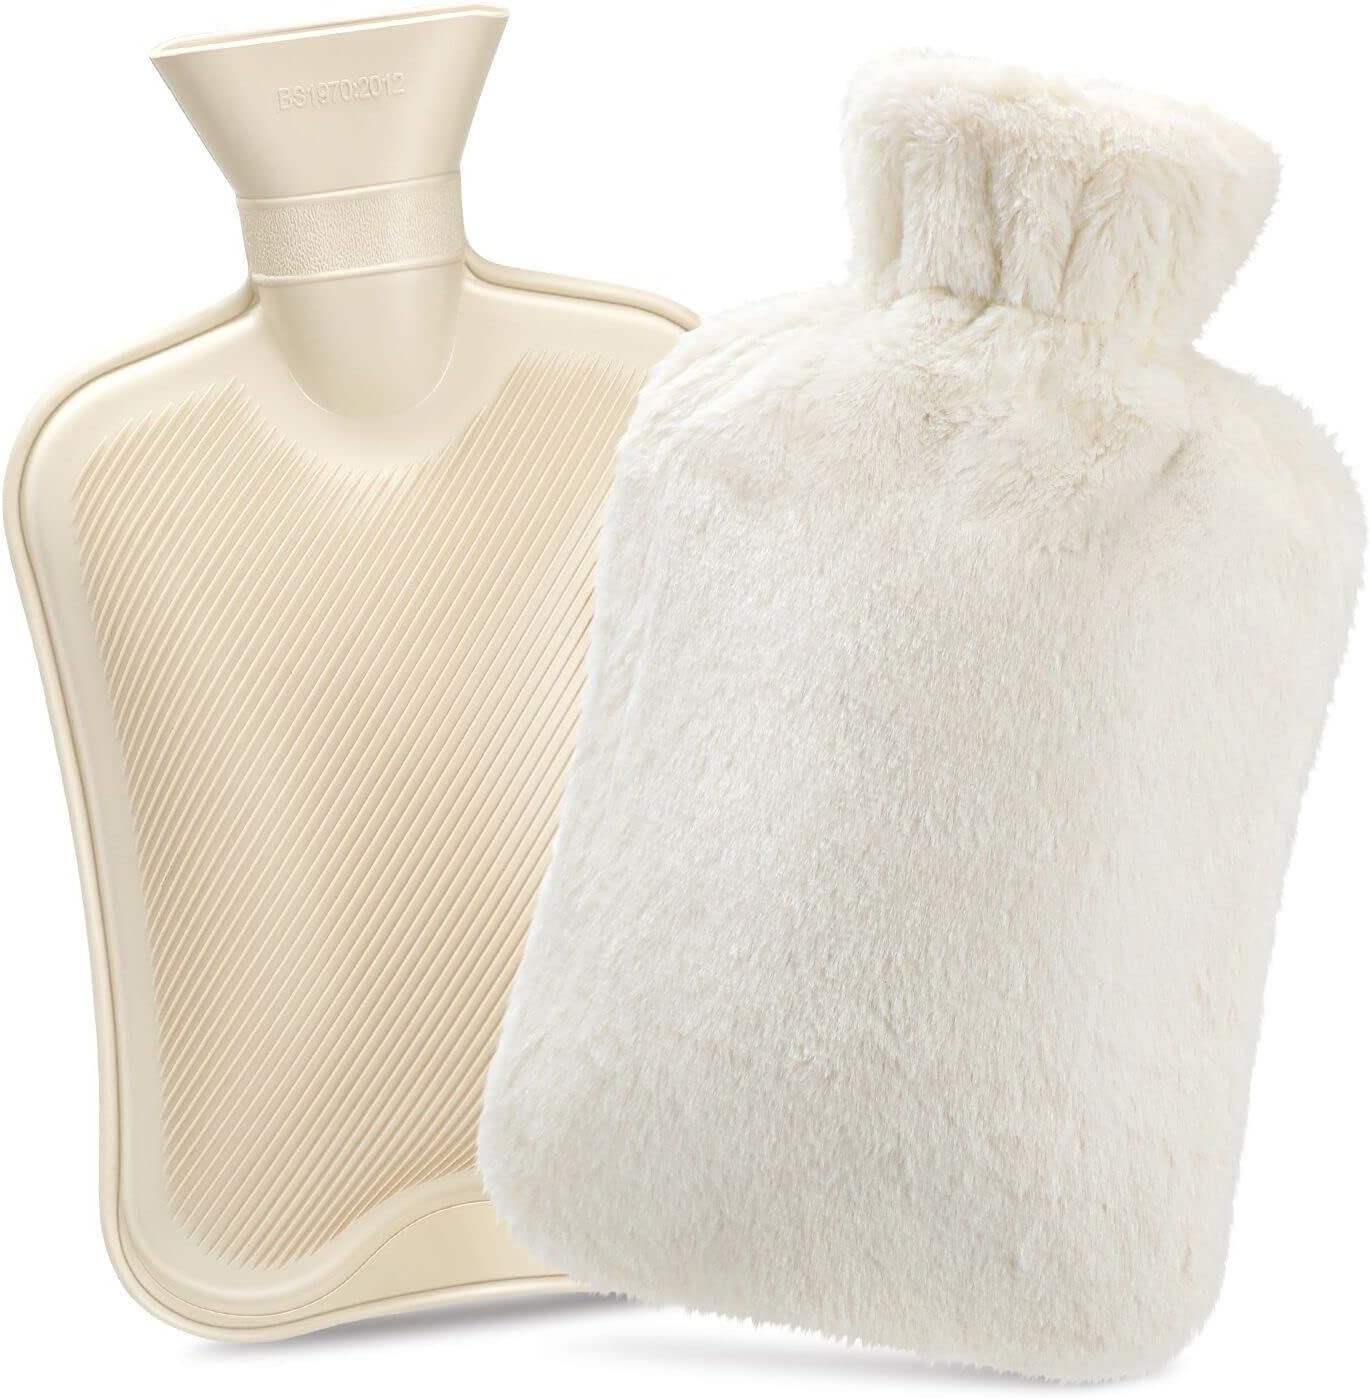 Hot Water Bottle with Cover, 2L Large Capacity, Premium Natural Rubber Hot Water Bag Cover 34509